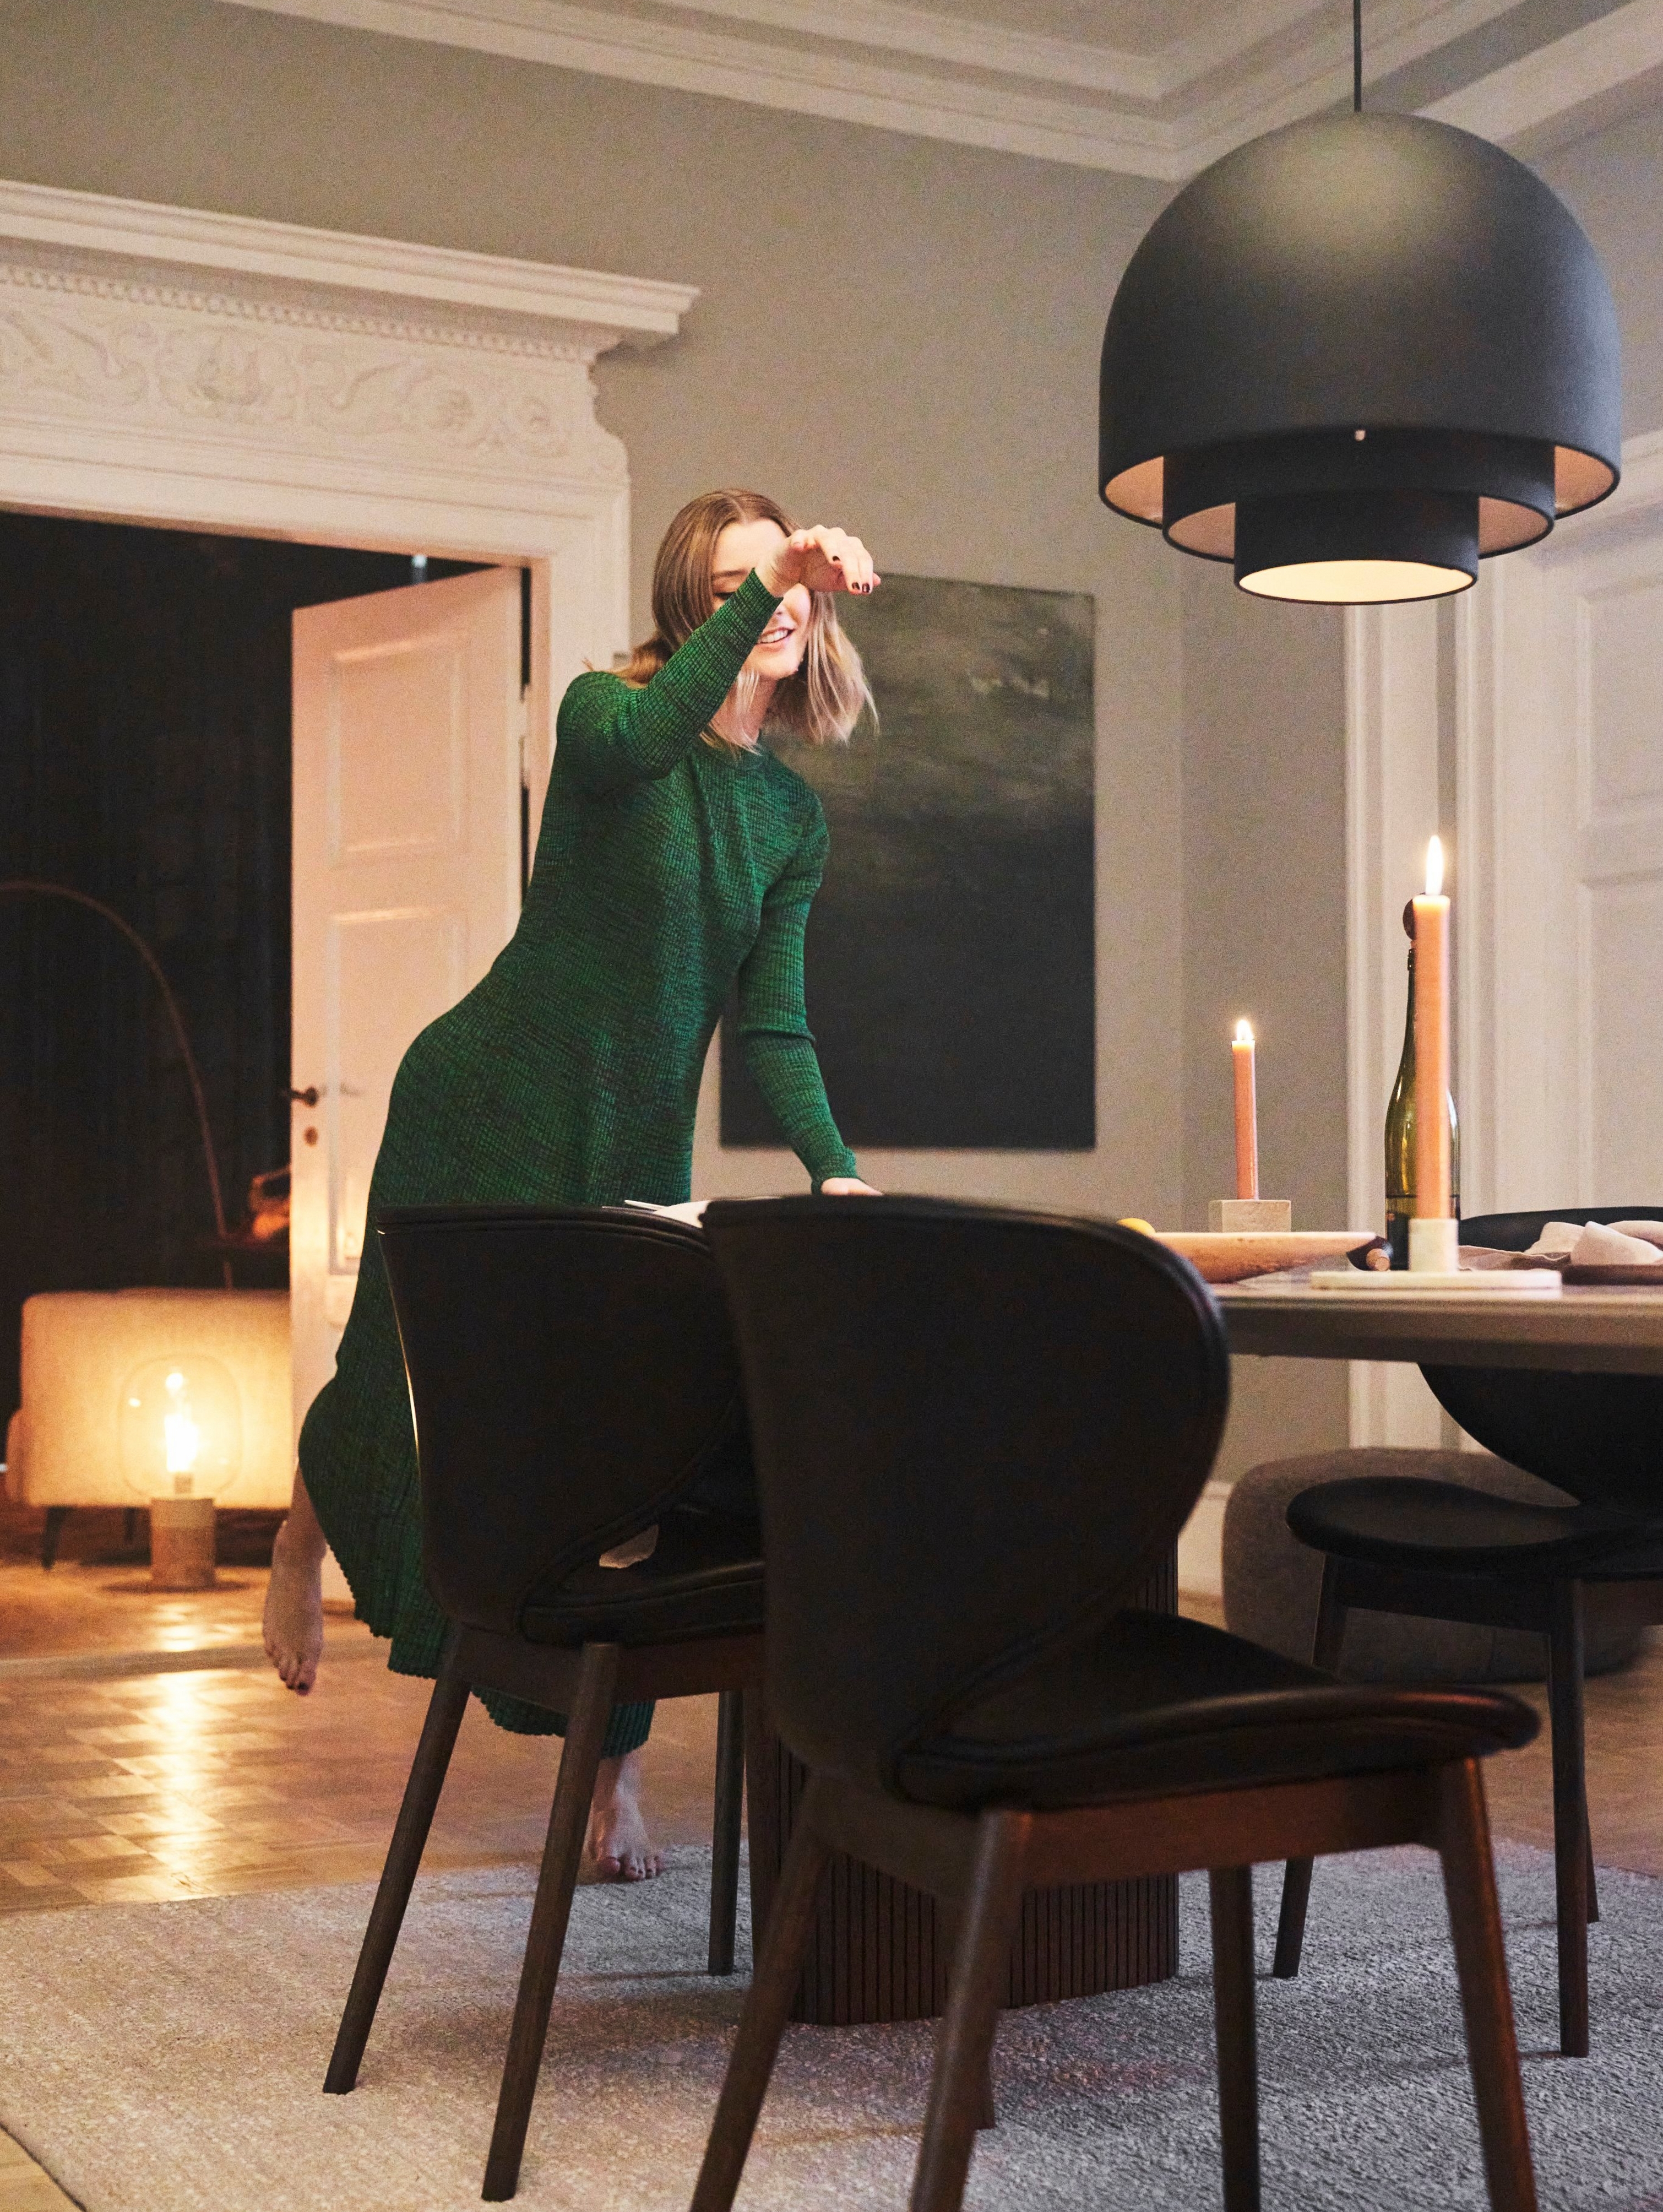 A woman dancing next to the Santiago dining table in brown ceramic.